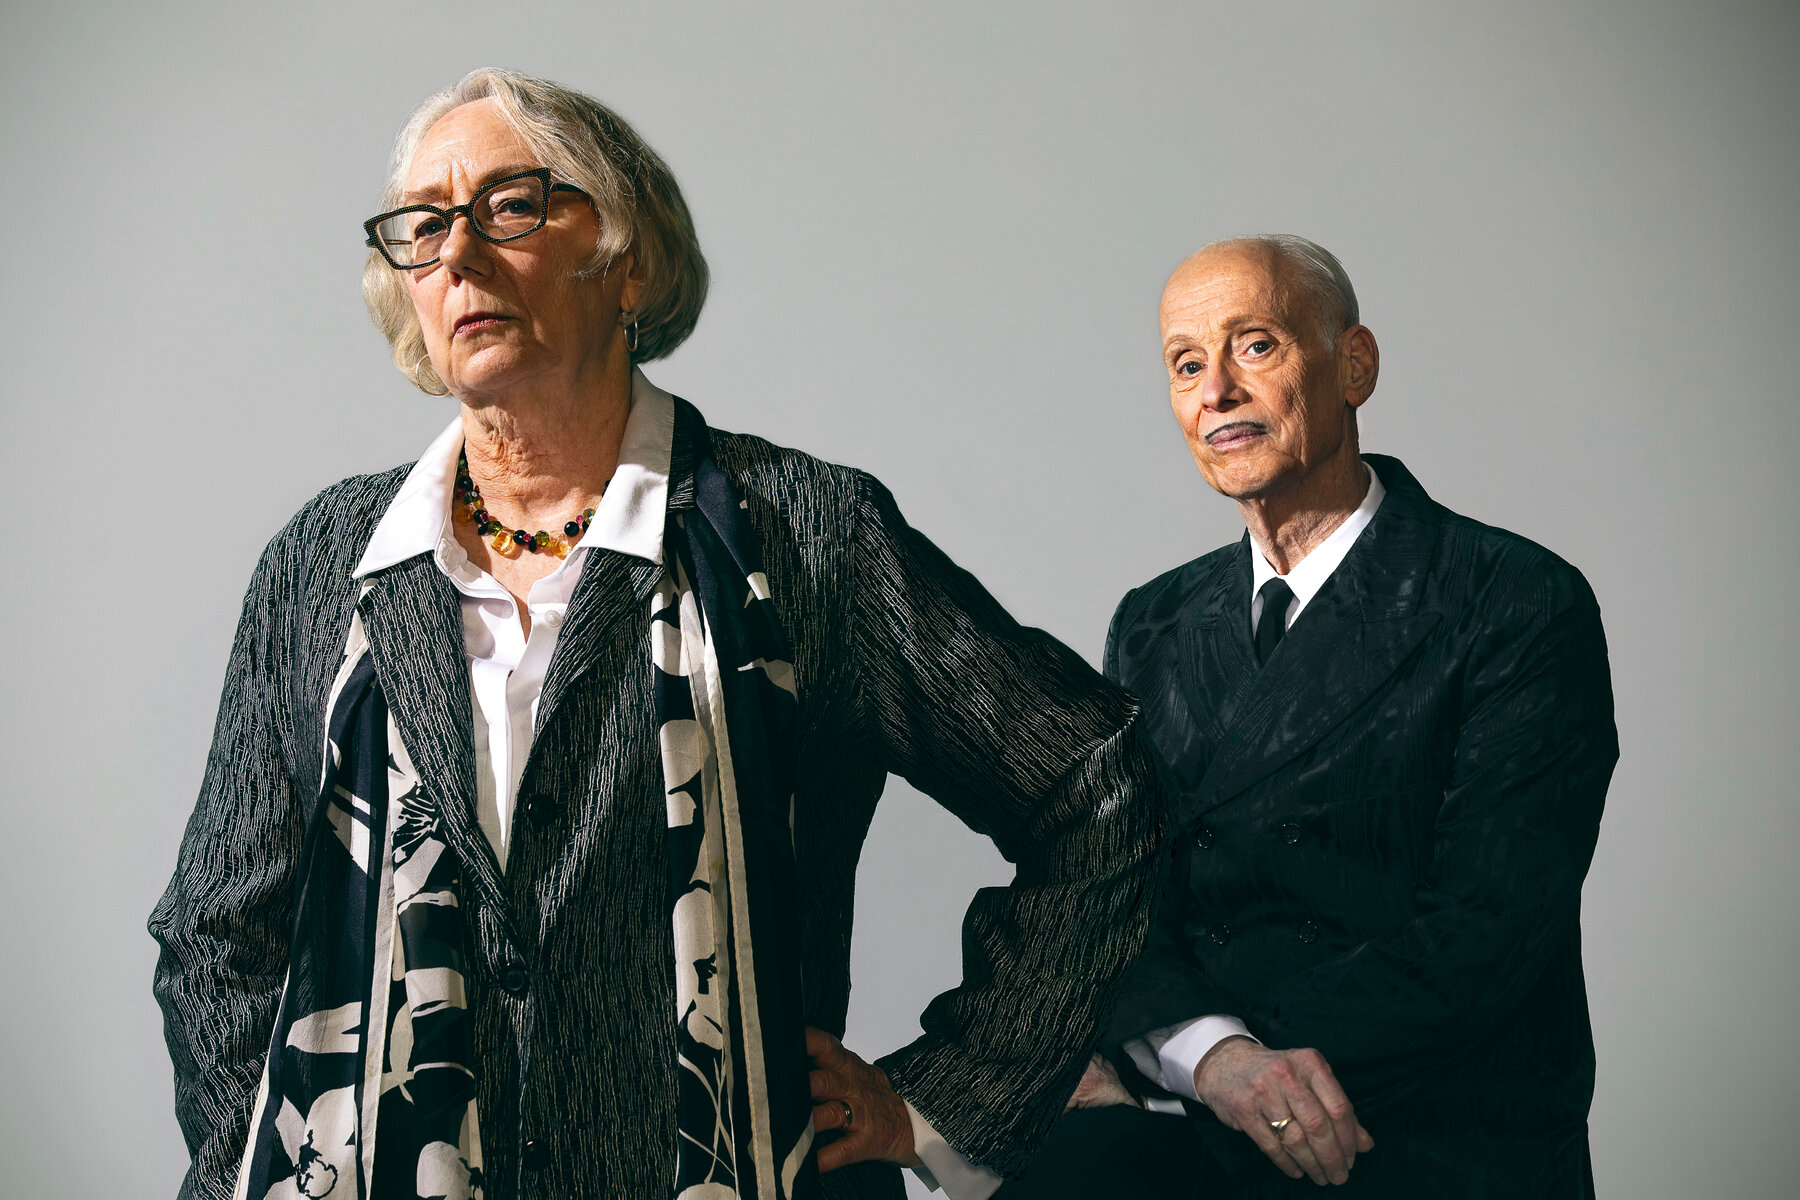 Mink Stole and John Waters, both wearing white shirts and dark gray jackets pose against a light gray background.